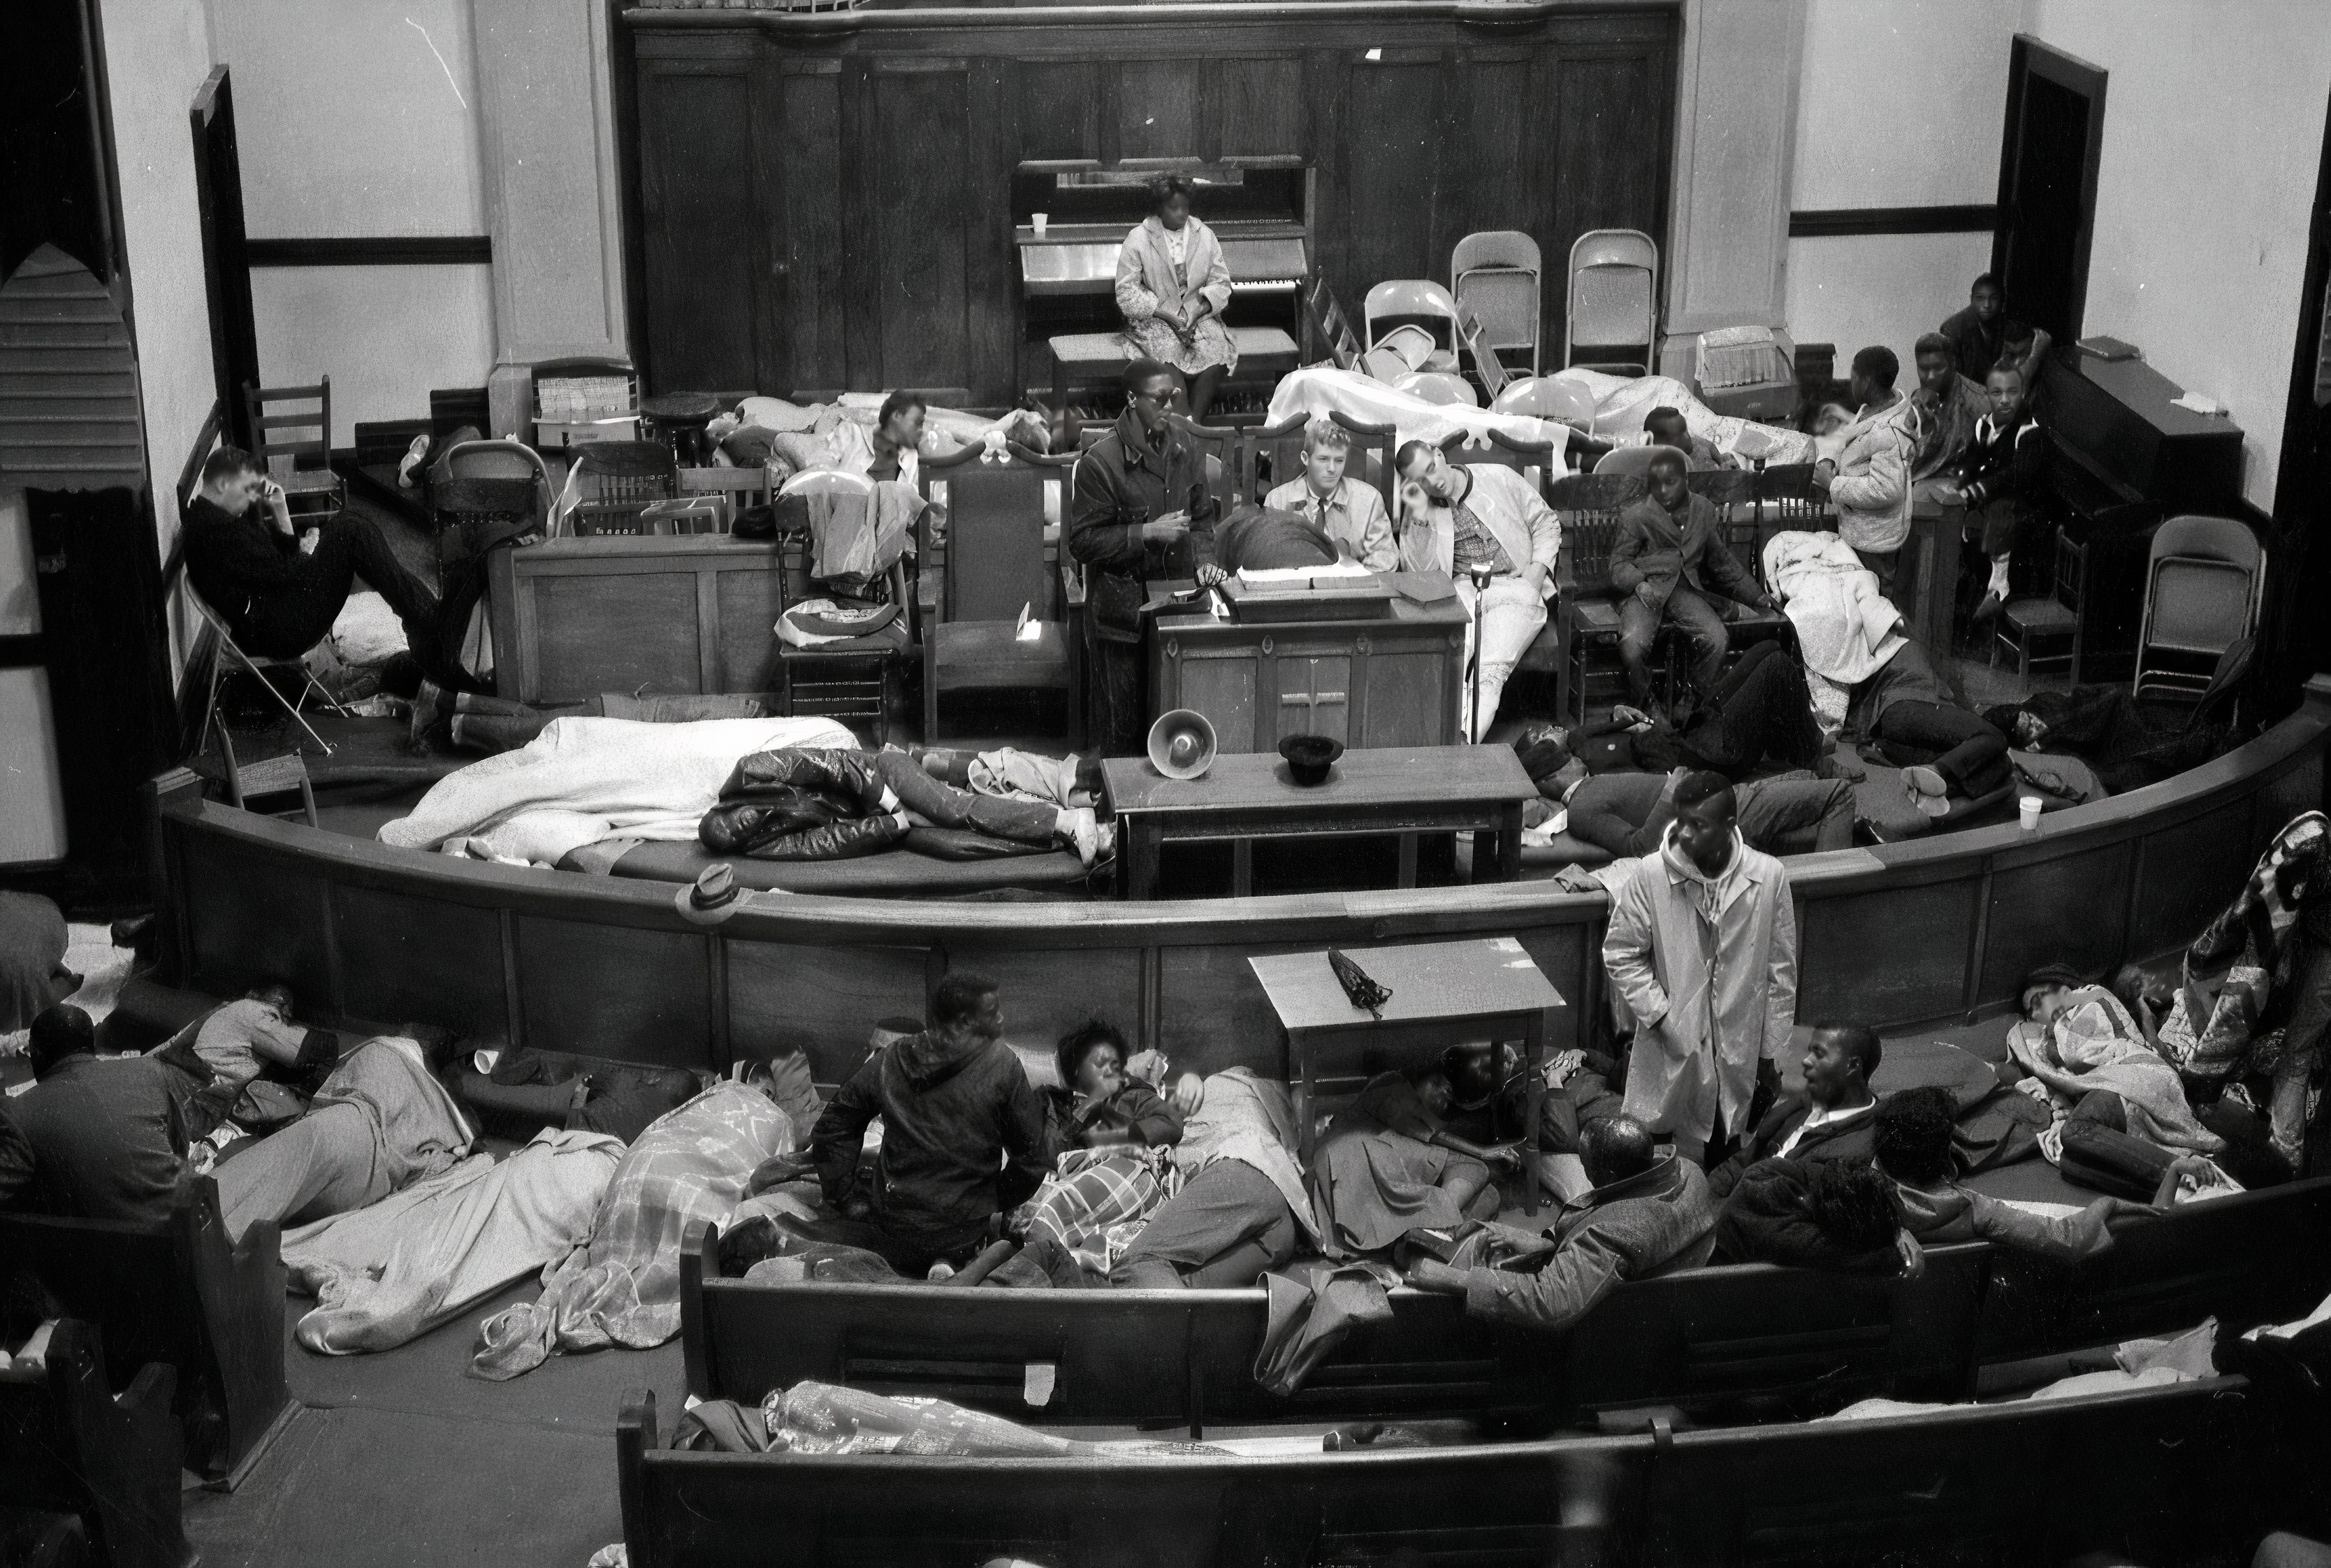 Civil rights activists sleep at Brown Chapel A.M.E. Church, Selma, Alabama, March 1965. Brown Chapel was the starting point for the Selma to Montgomery March.